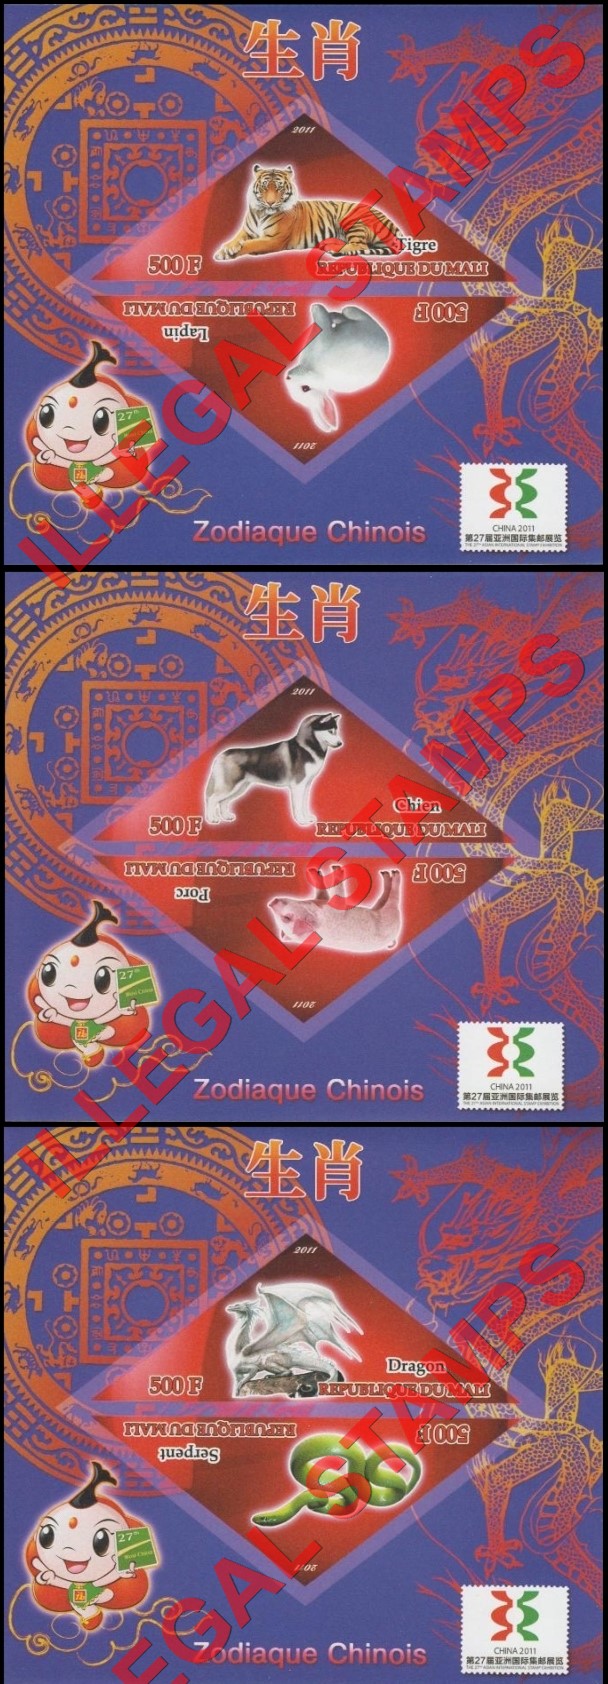 Mali 2011 Chinese Zodiac Illegal Stamp Souvenir Sheets of 2 (Part 1)